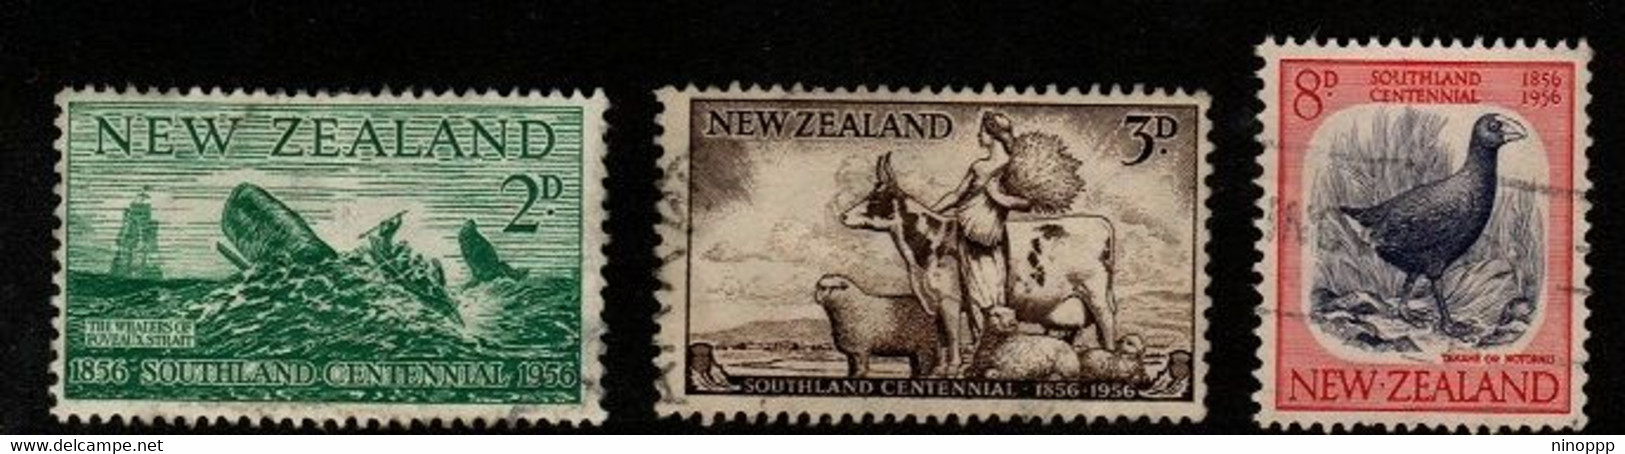 New Zealand SG 752-54 1956 Southland Centennial,used - Used Stamps